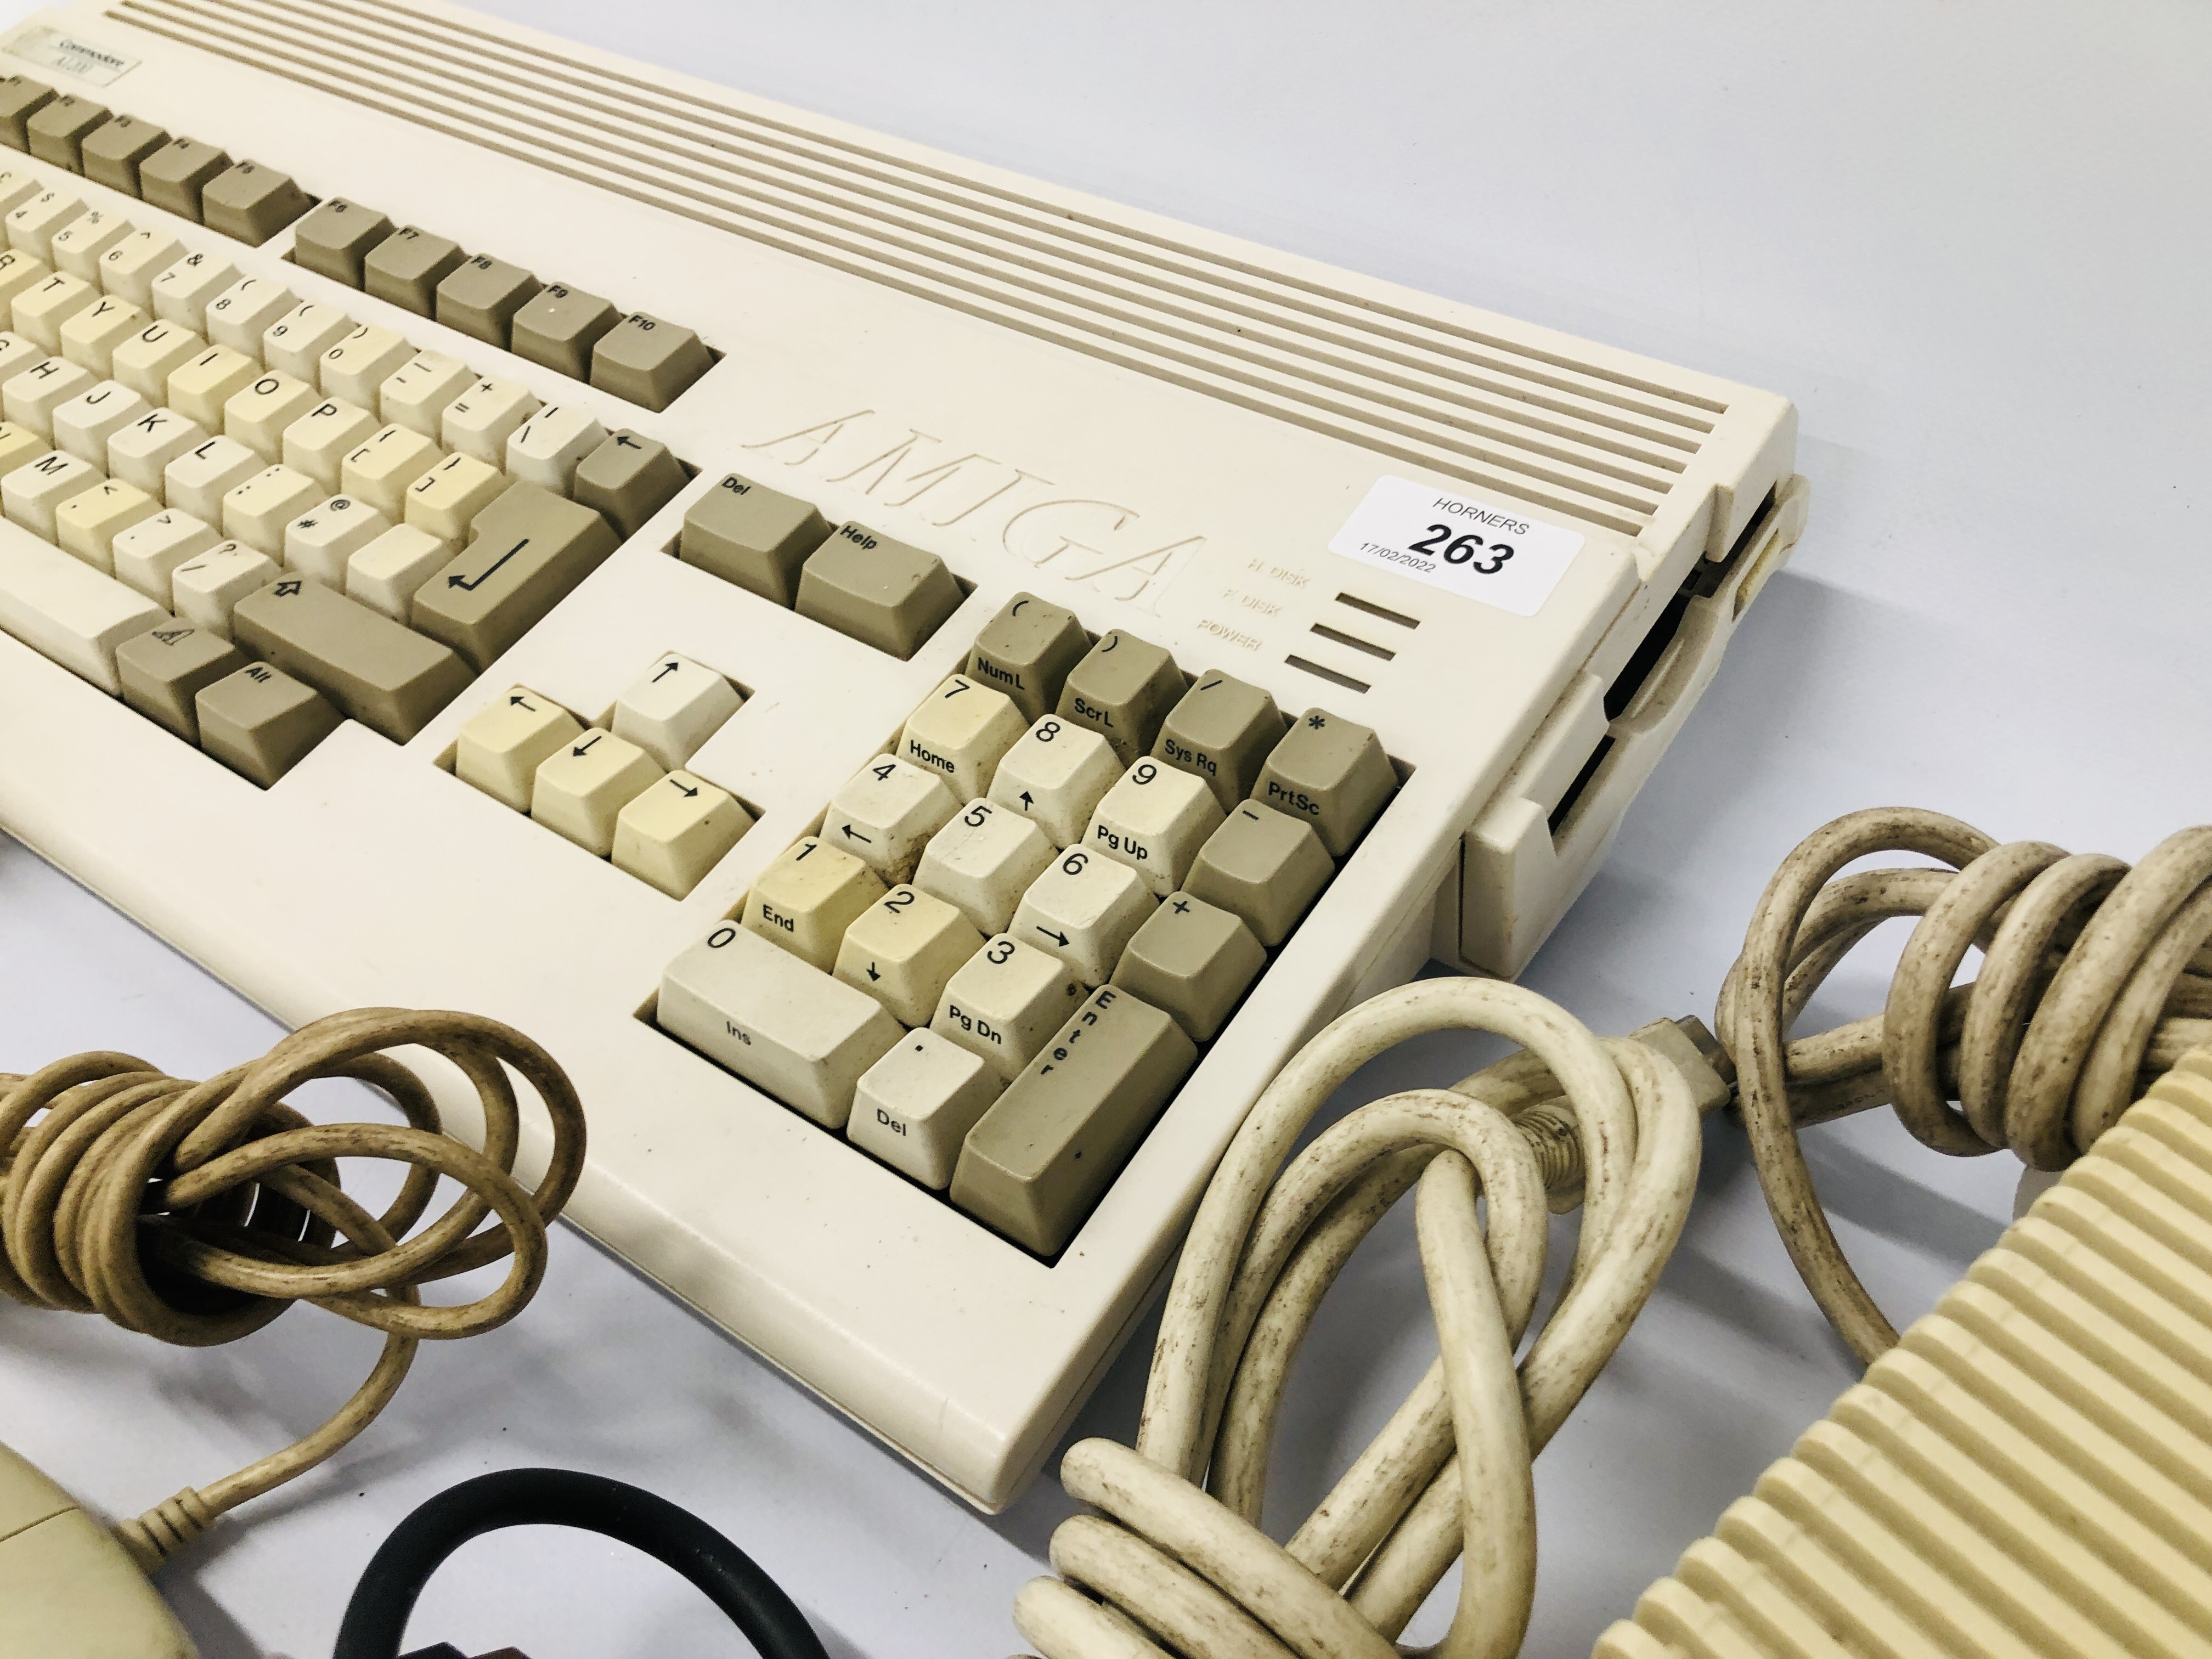 AMIGA COMMODORE A1200 CONSOLE WITH ACCESSORIES - SOLD AS SEEN - Image 4 of 7